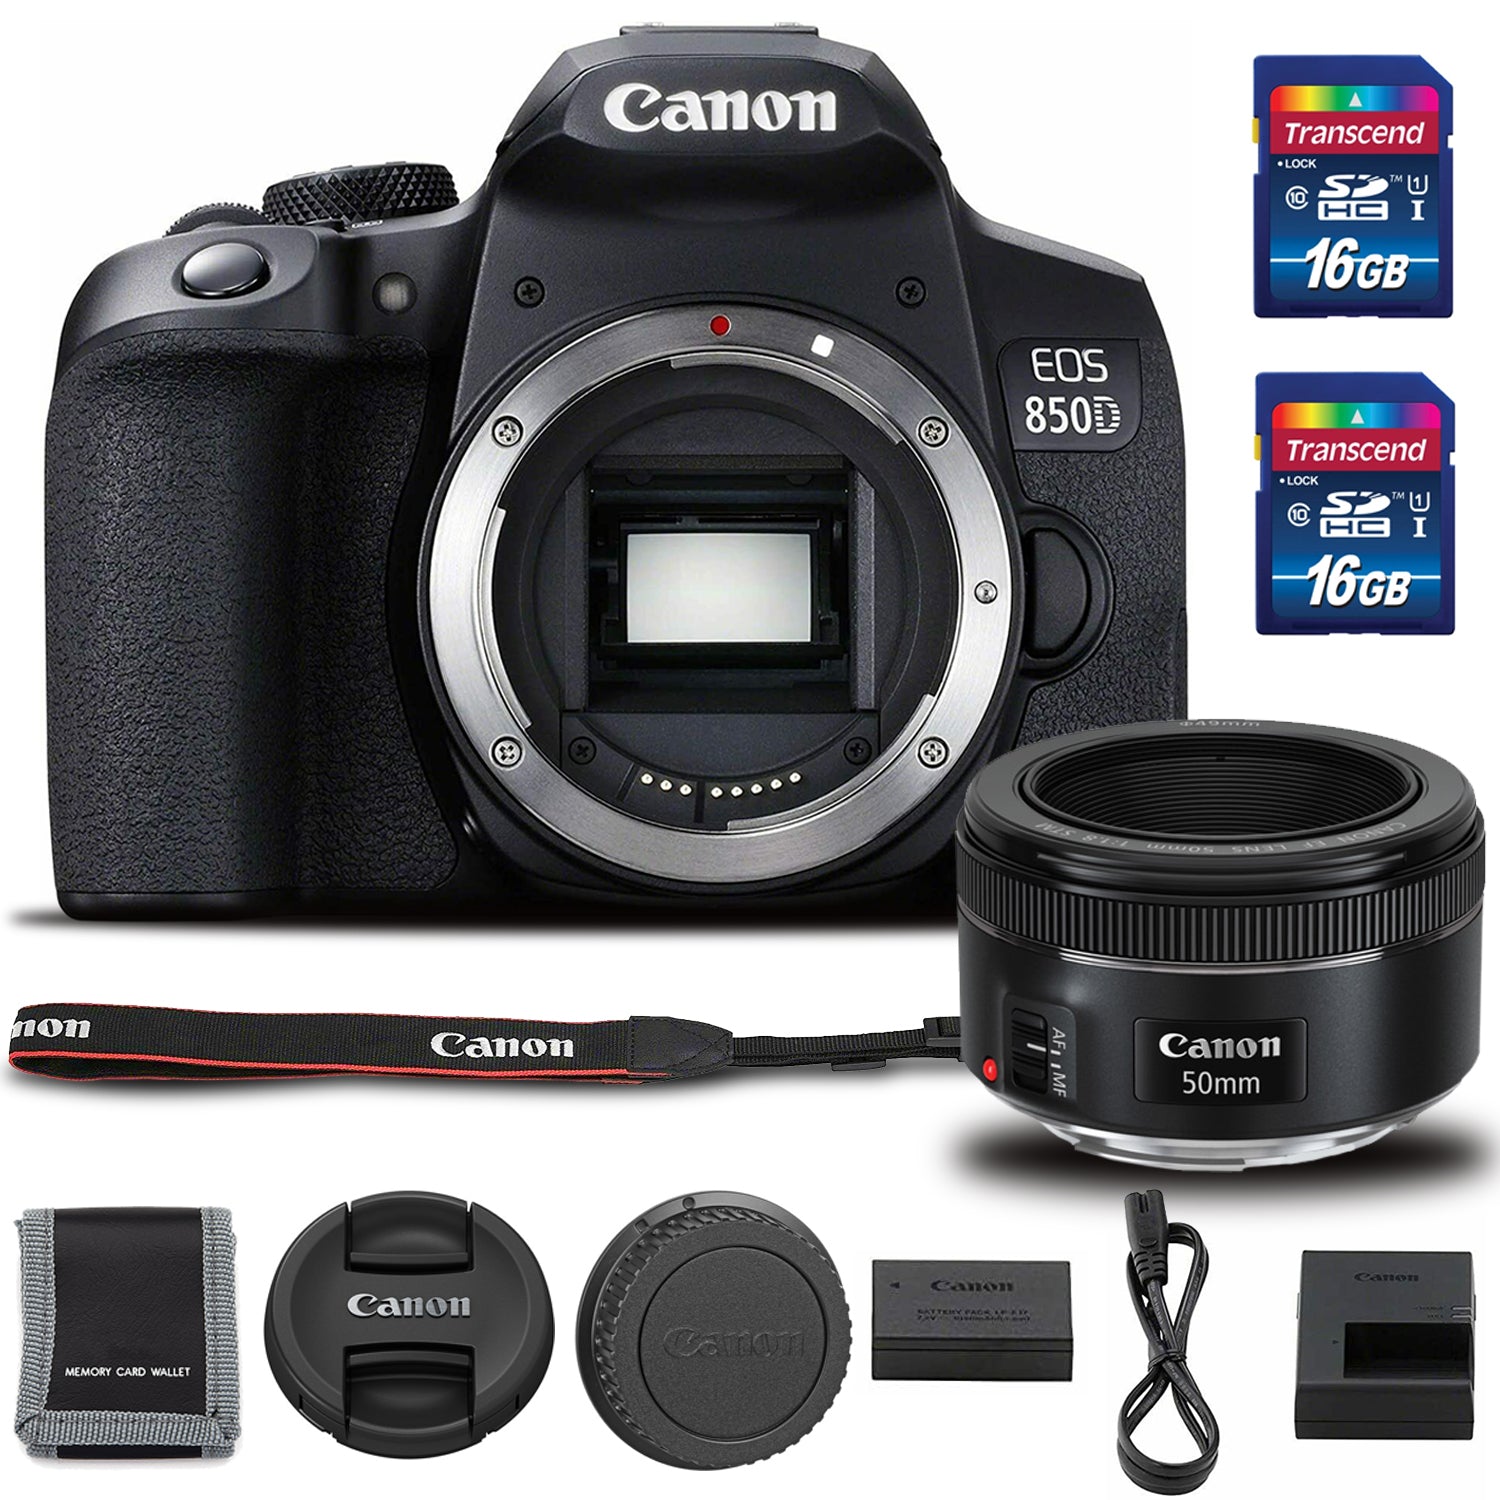 Canon EOS 850D DSLR Camera with 50mm F 1.8 STM Lens (Intl Model) + Cleaning Kit + (2)16GB SD Cards